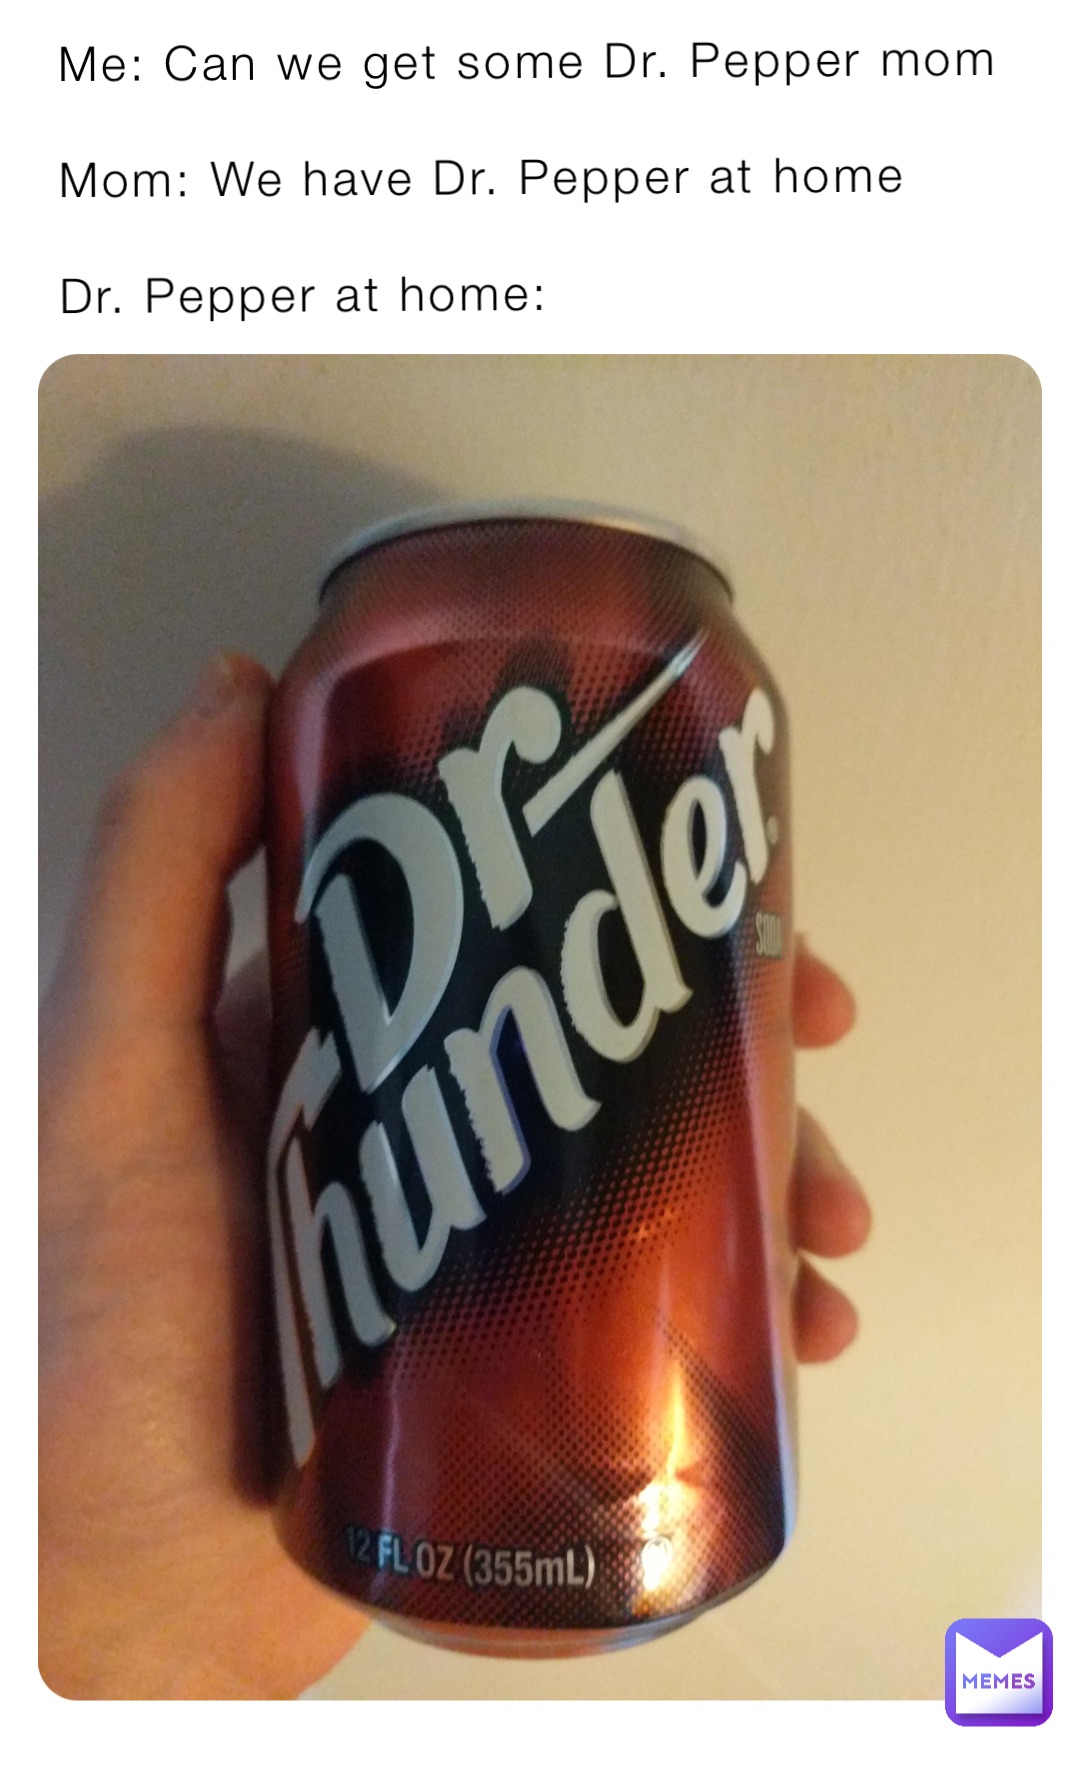 Me: Can we get some Dr. Pepper mom

Mom: We have Dr. Pepper at home

Dr. Pepper at home: